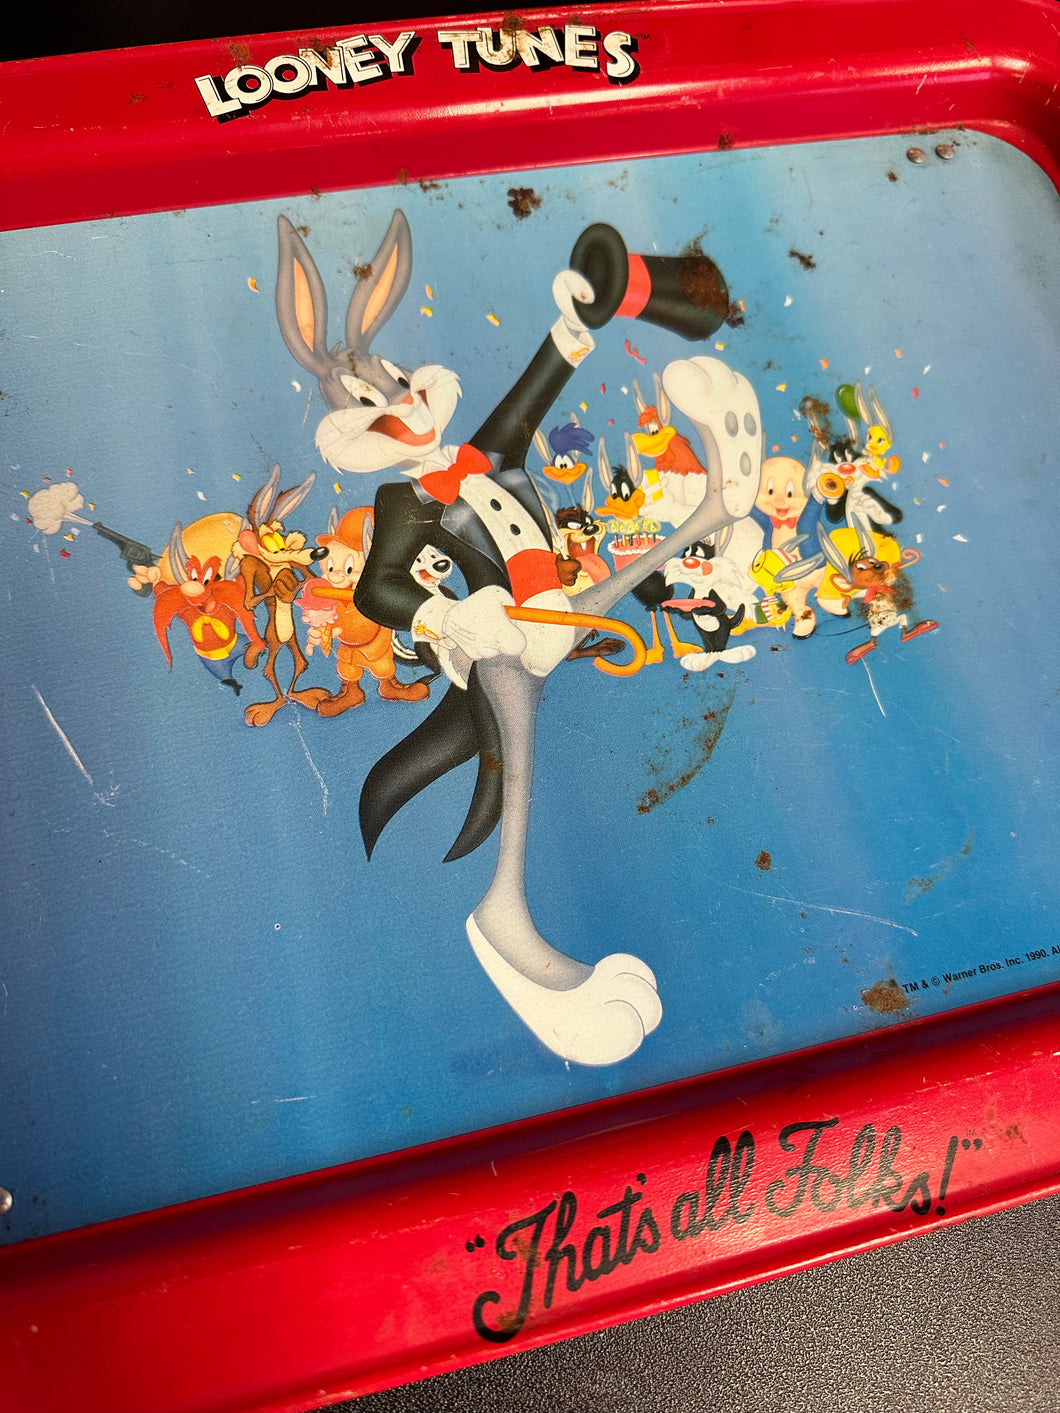 LOONEY TUNES “THAT’S ALL FOLKS!” METAL TV TRAY PREOWNED